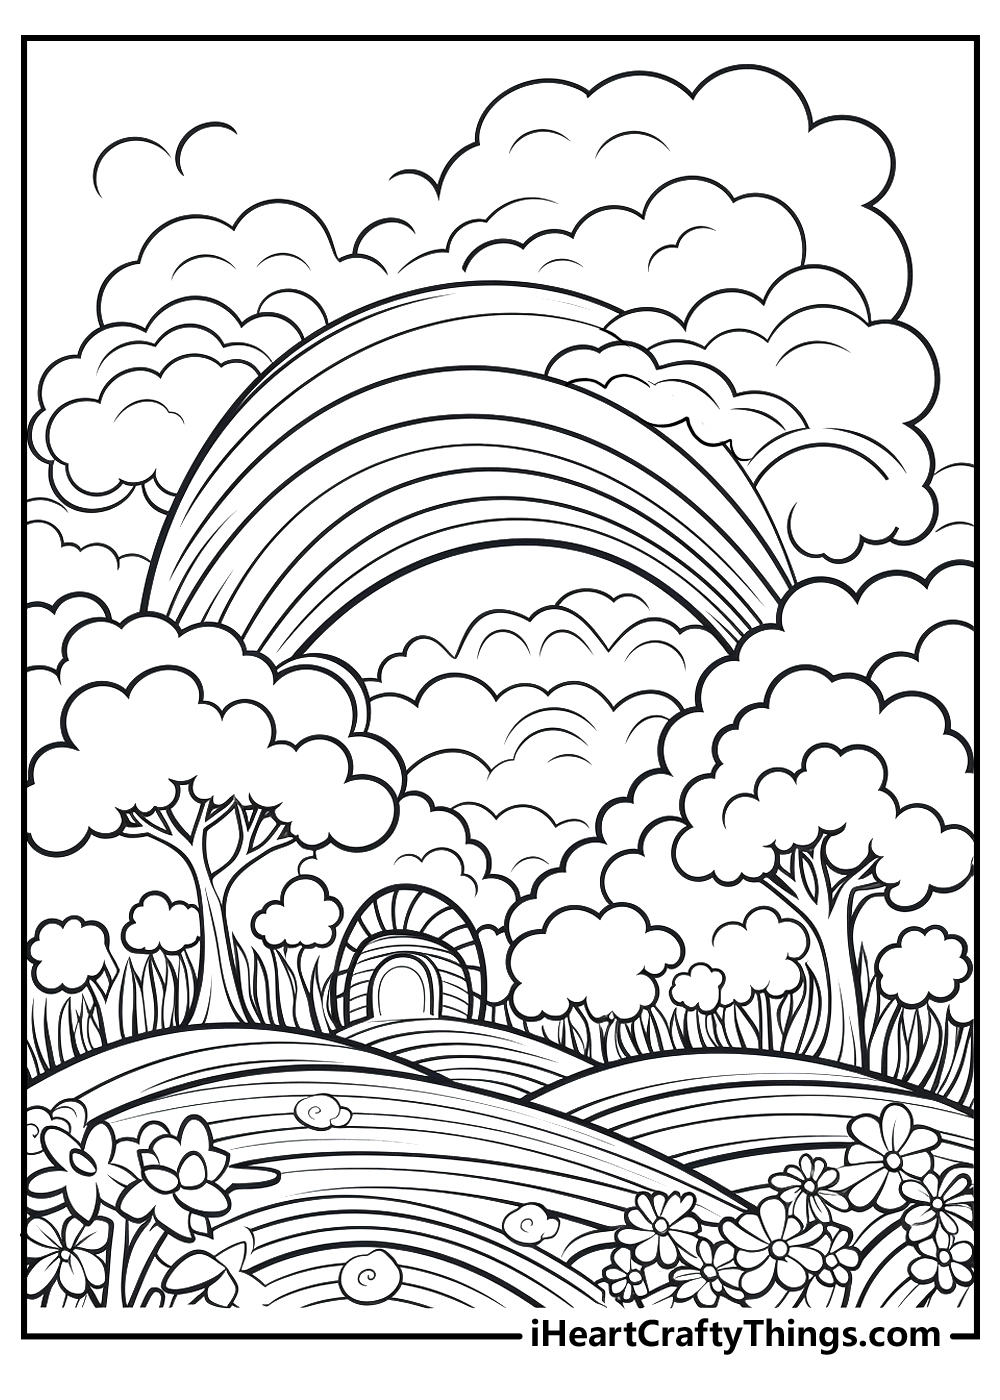 original rainbow coloring pages